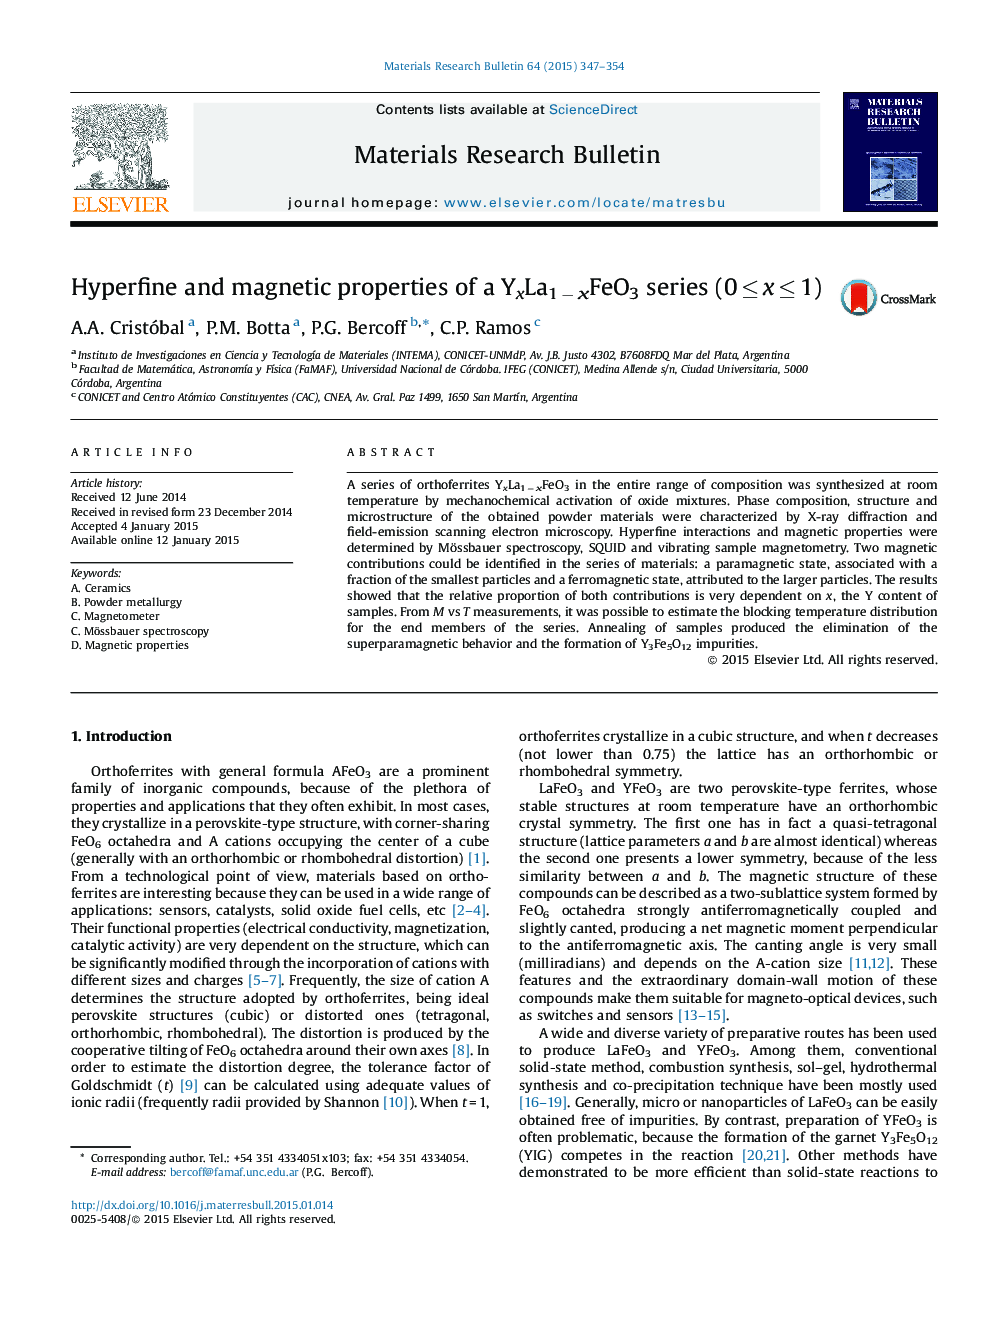 Hyperfine and magnetic properties of a YxLa1 − xFeO3 series (0 ≤ x ≤ 1)